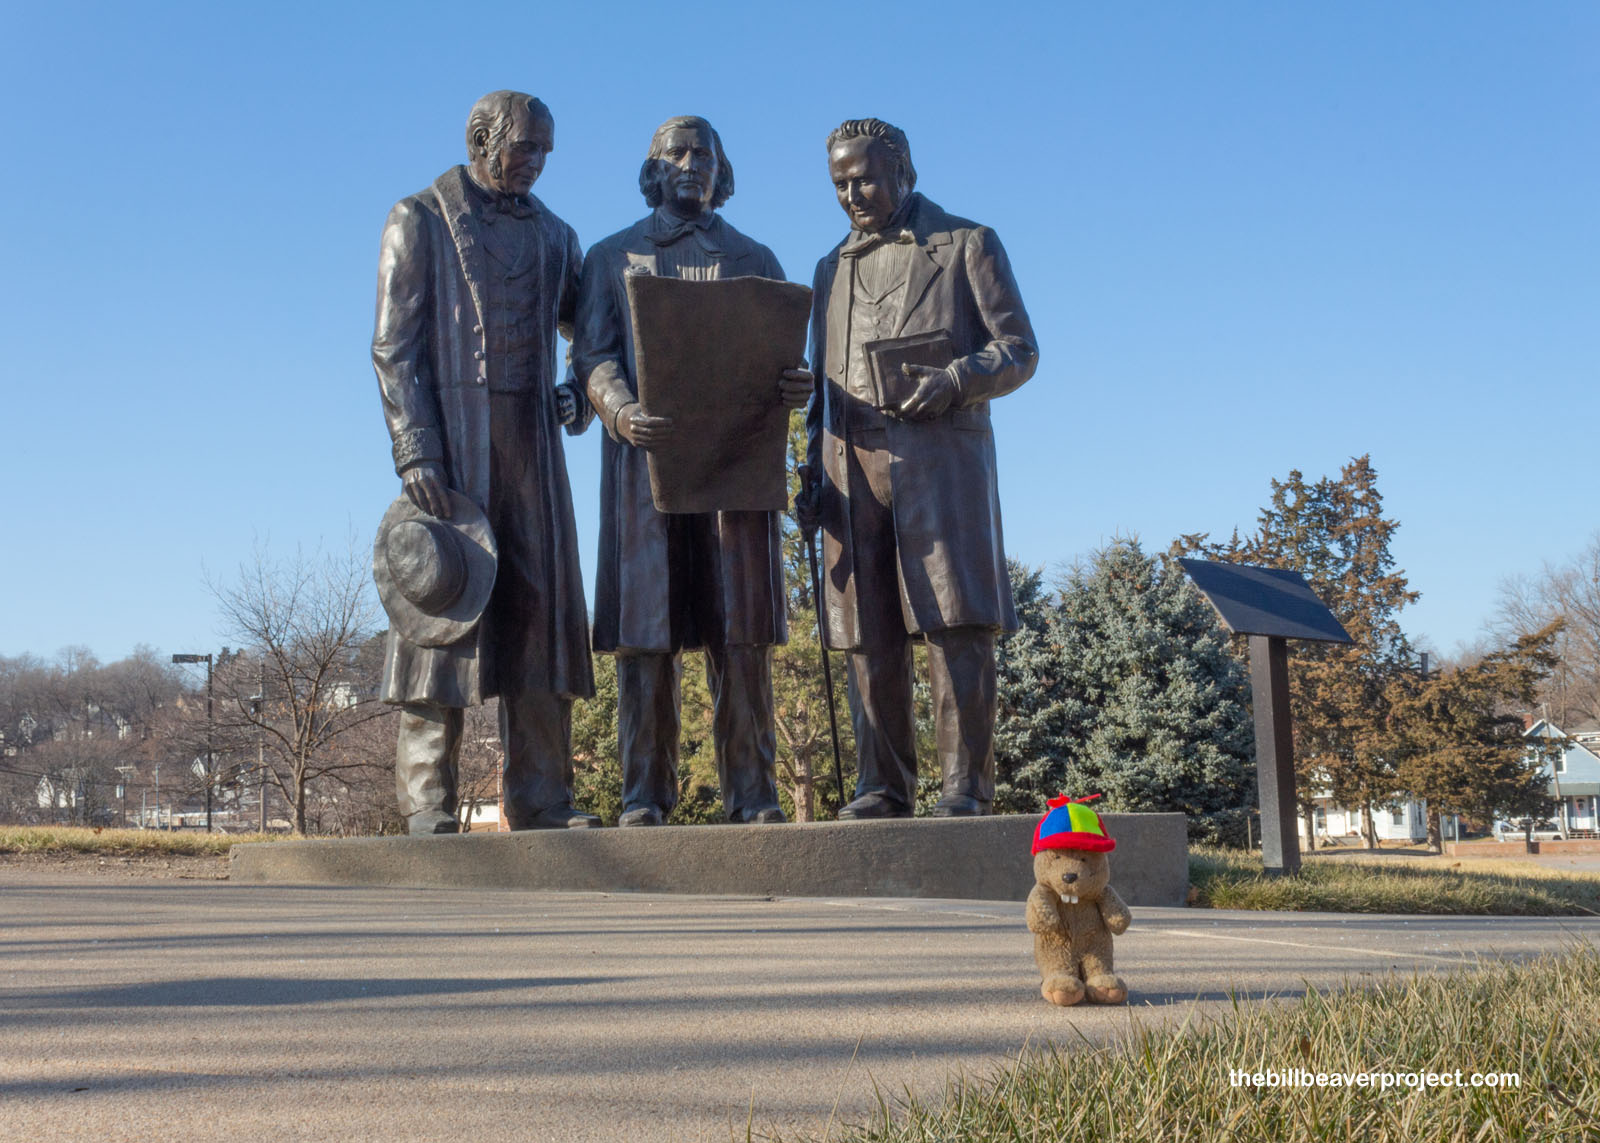 A statue of Brigham Young, Heber C. Kimball, and Willard Richards!